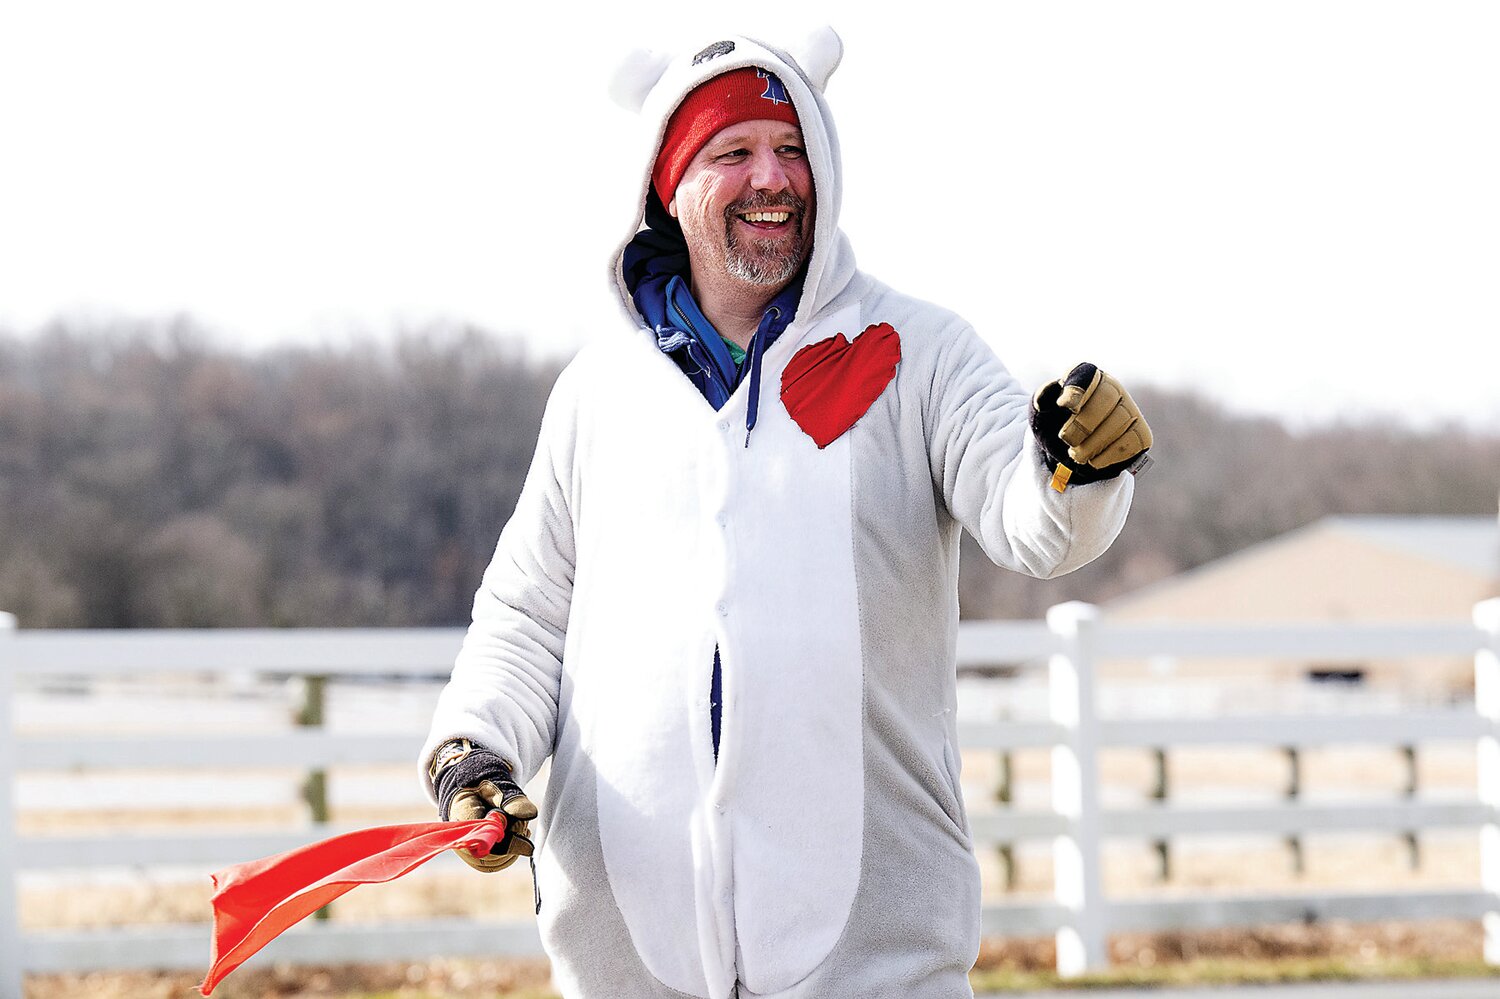 David Jacoby, dressed for the occasion, helps to direct the runners at Delaware Valley University during the Great Cupid Run, an event hosted by Scoogie Events.